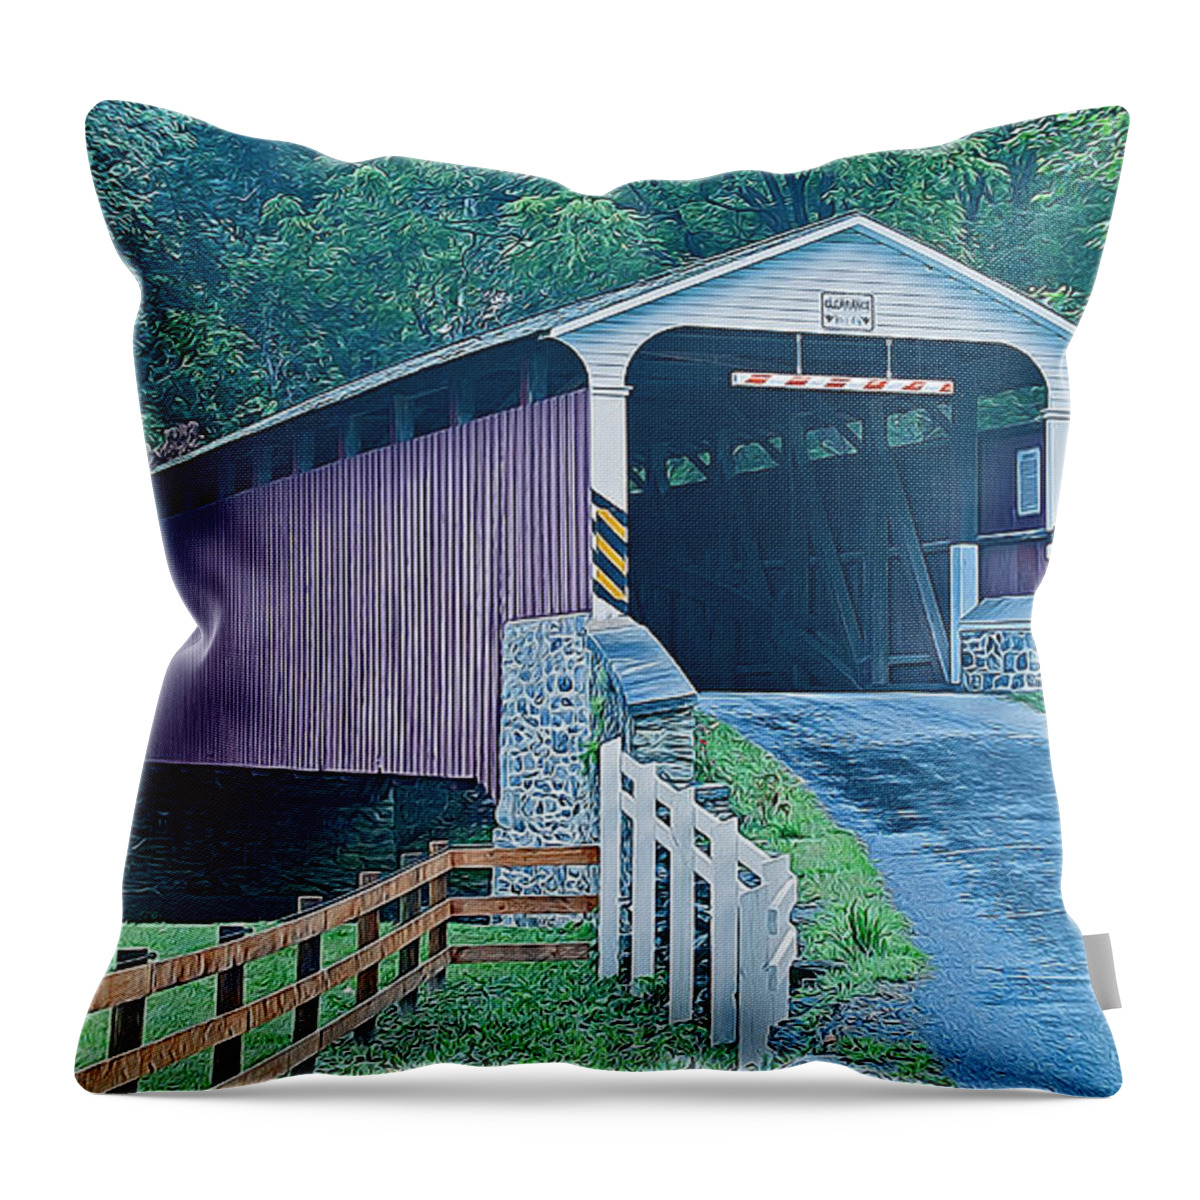 Mercer's Mill Throw Pillow featuring the photograph Mercer's Mill Covered Bridge by Michael Porchik